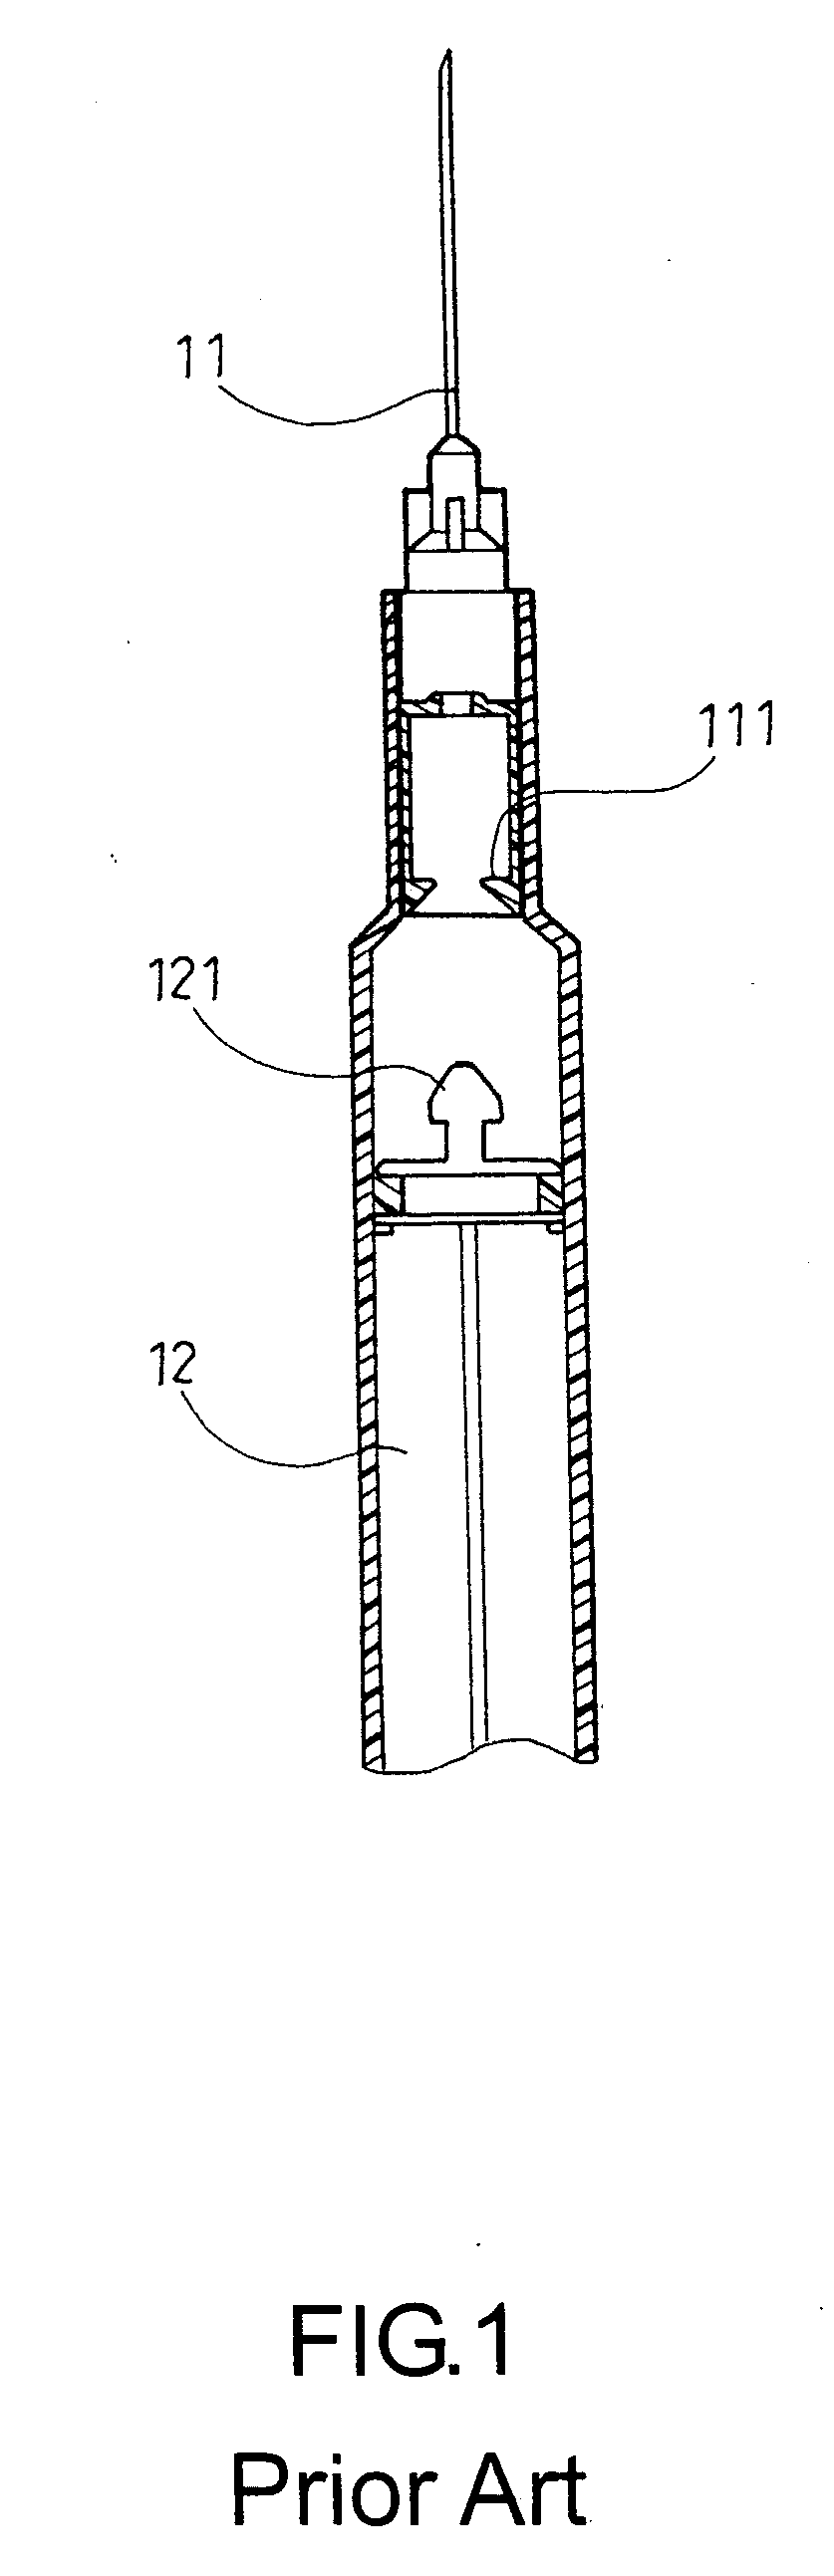 Retractable safety syringe